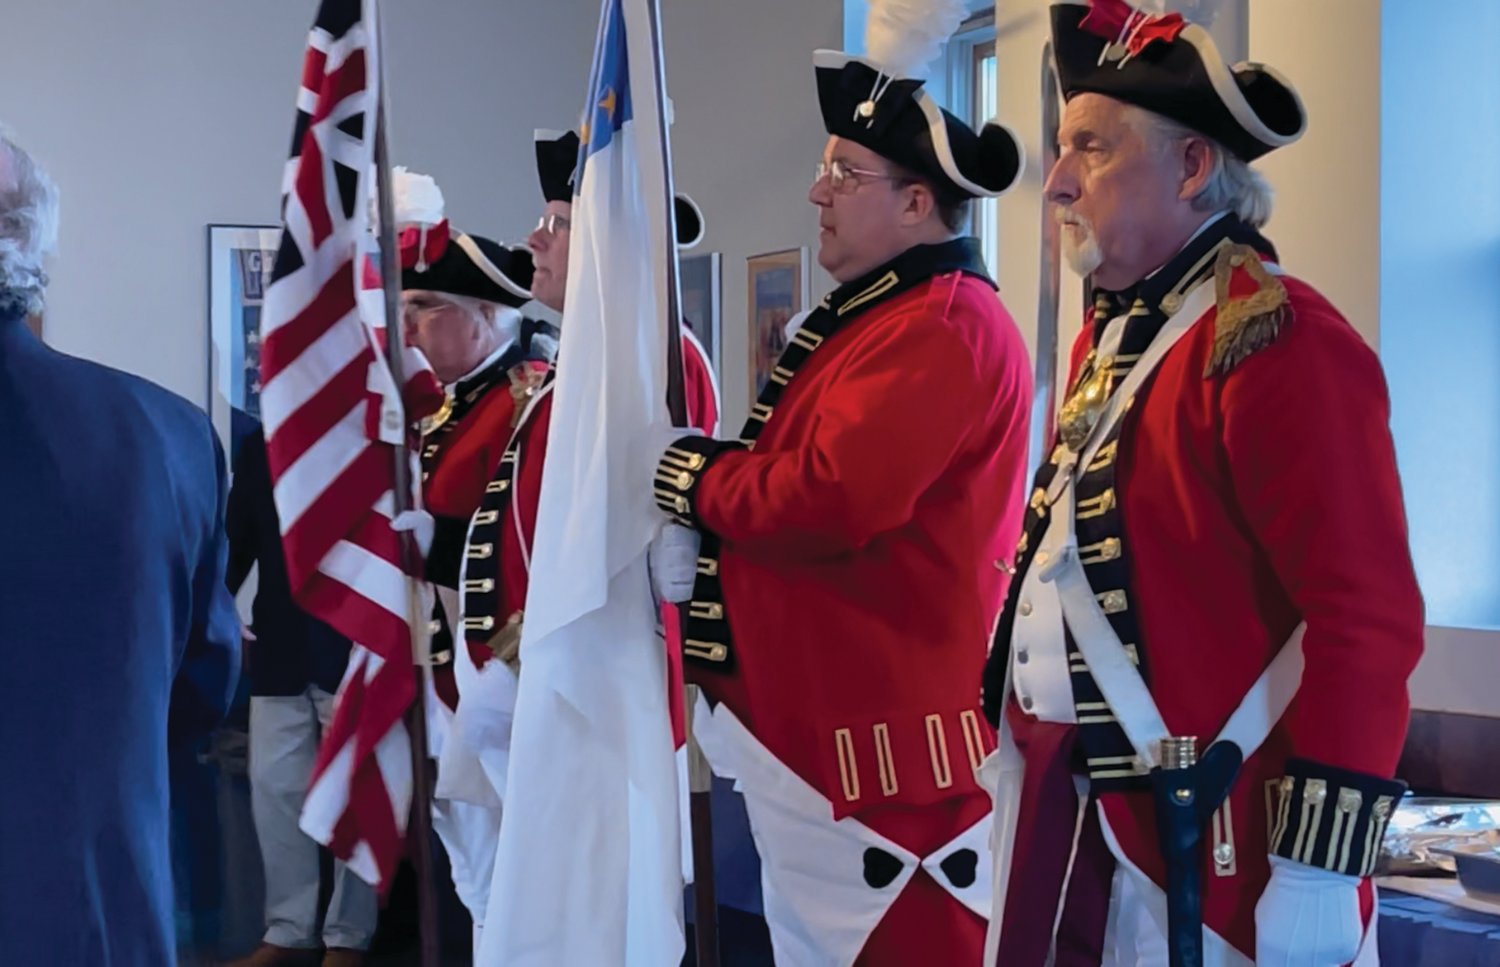 MAKING AN ENTRANCE: Members of the Pawtuxet Rangers led off last week’s ceremony, marching into the Aspray Boat House for a presentation of the colors.